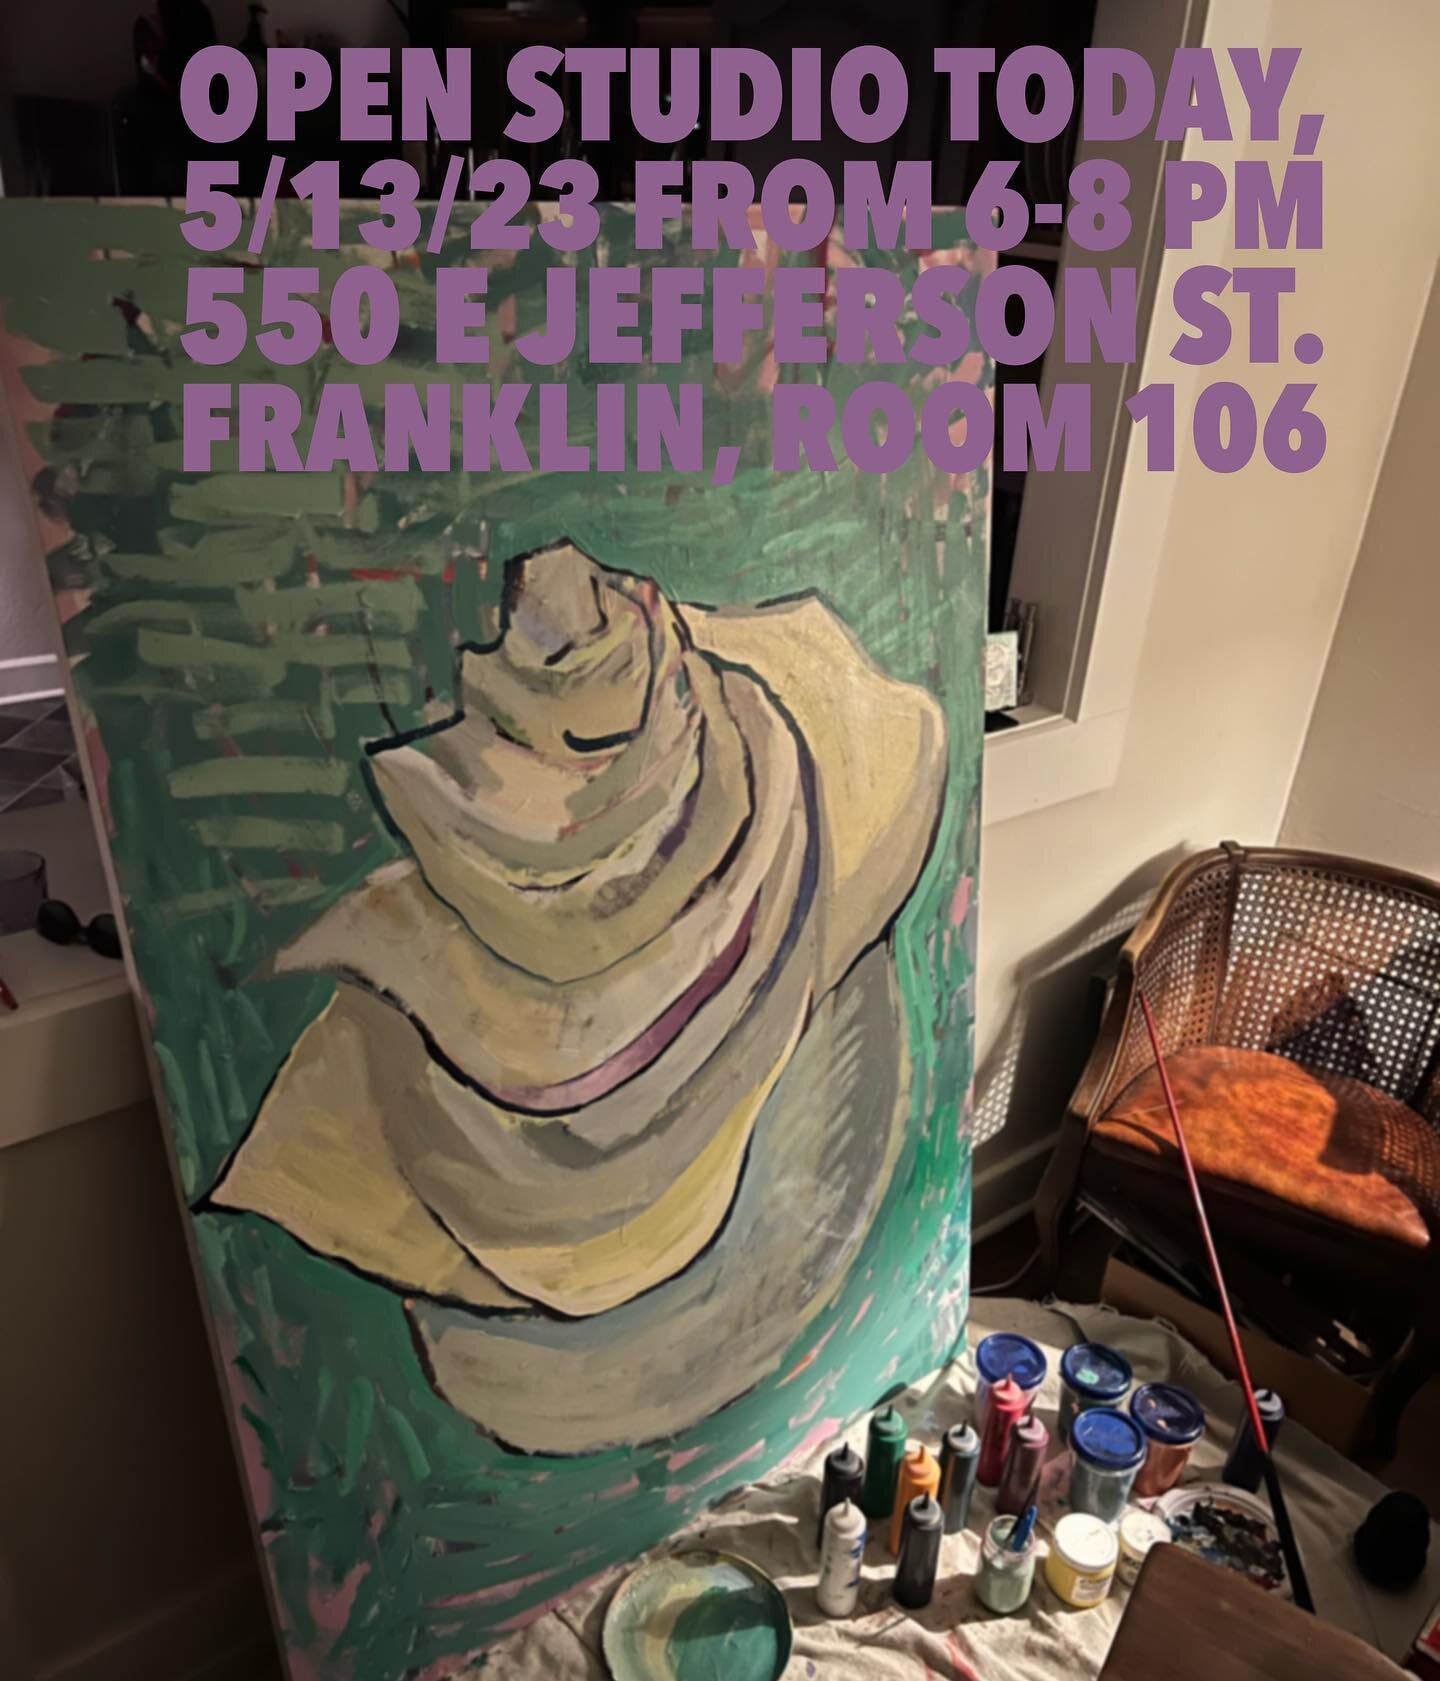 Open studio this evening, 5/13/23 from 6-8 pm, 550 E Jefferson in Franklin room #106
.
#art #artist #artwork #paint #painting #paintings #flower #giantflowerpainting
#abstract #abstractart #abstractartist #abstractpainting #nonobjective #nonobjective